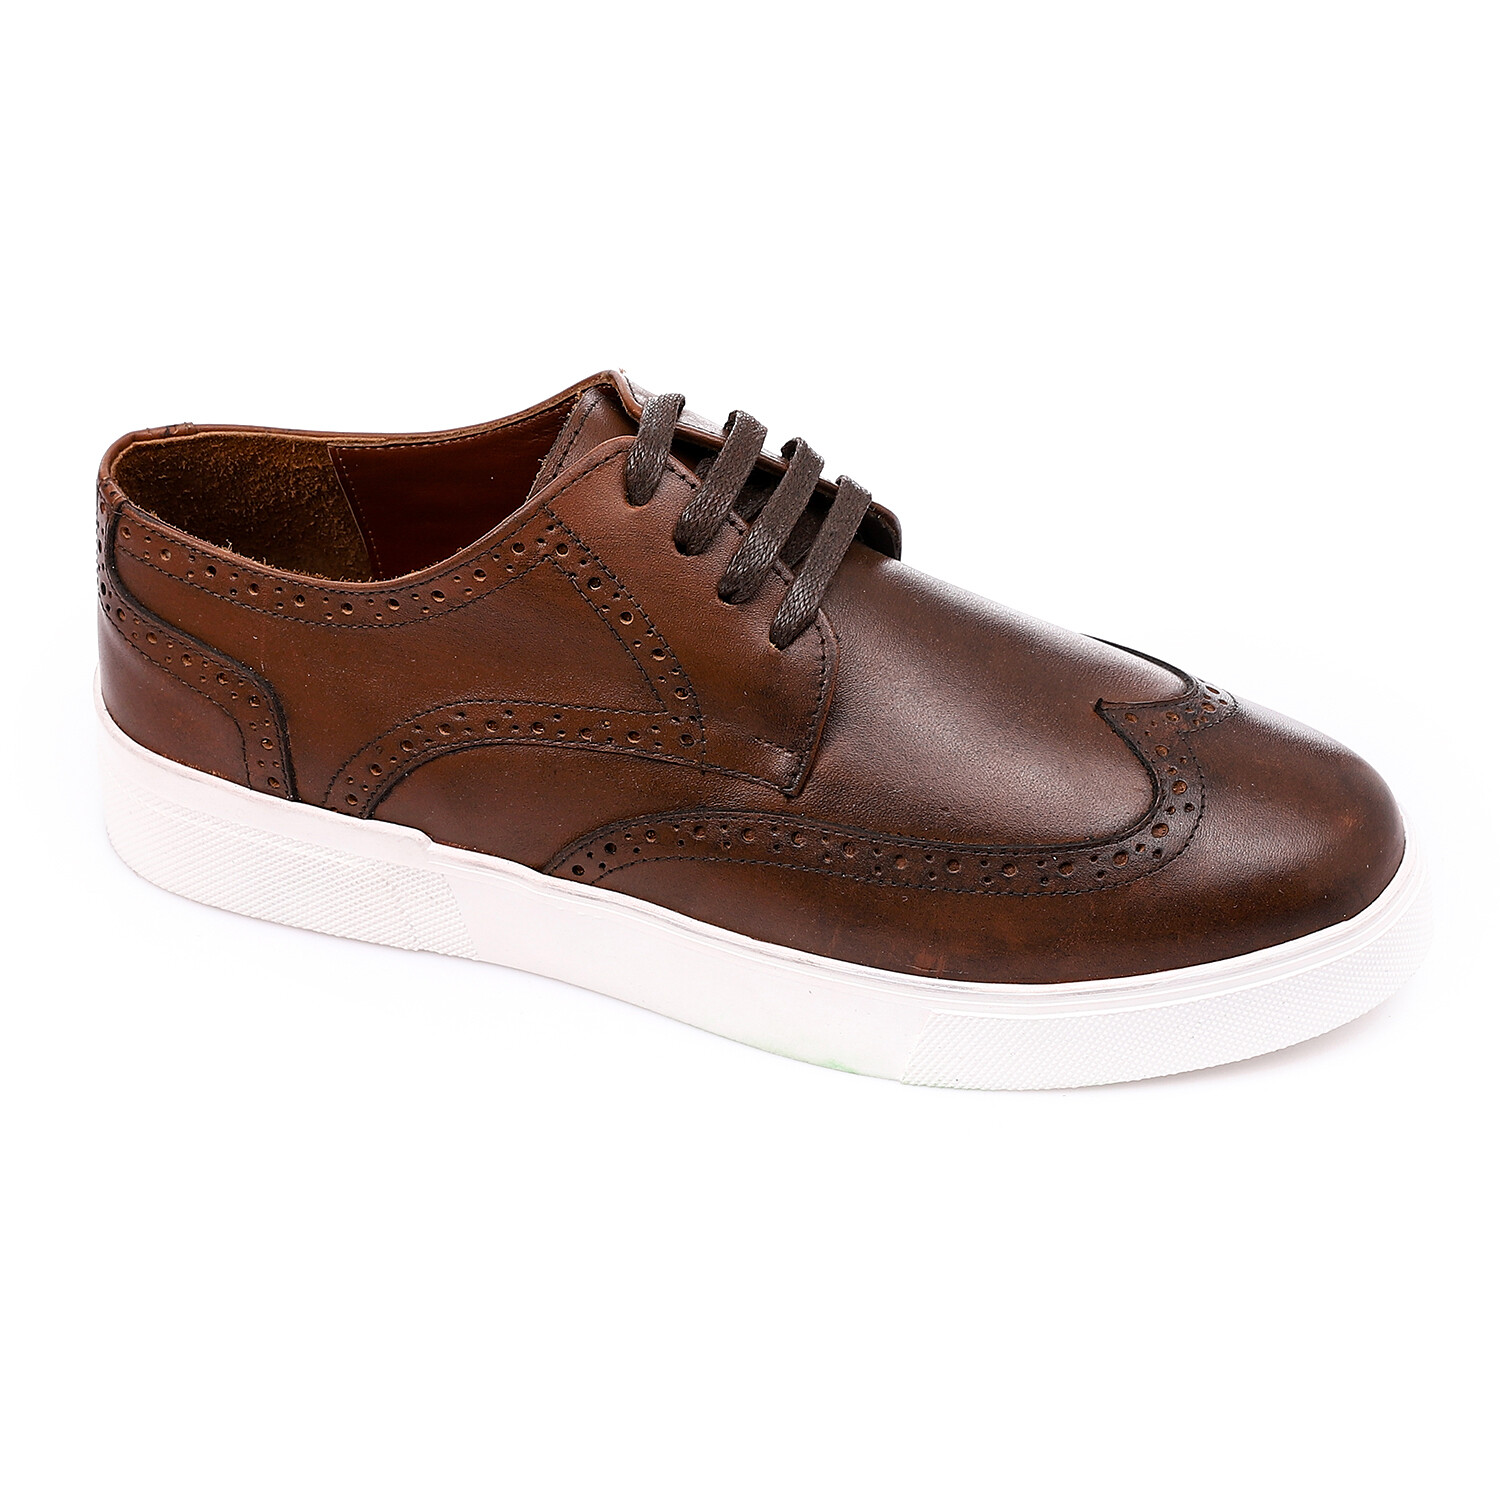 Lace Up Round Toecap Flat Sneakers - Brunette Brown 3953